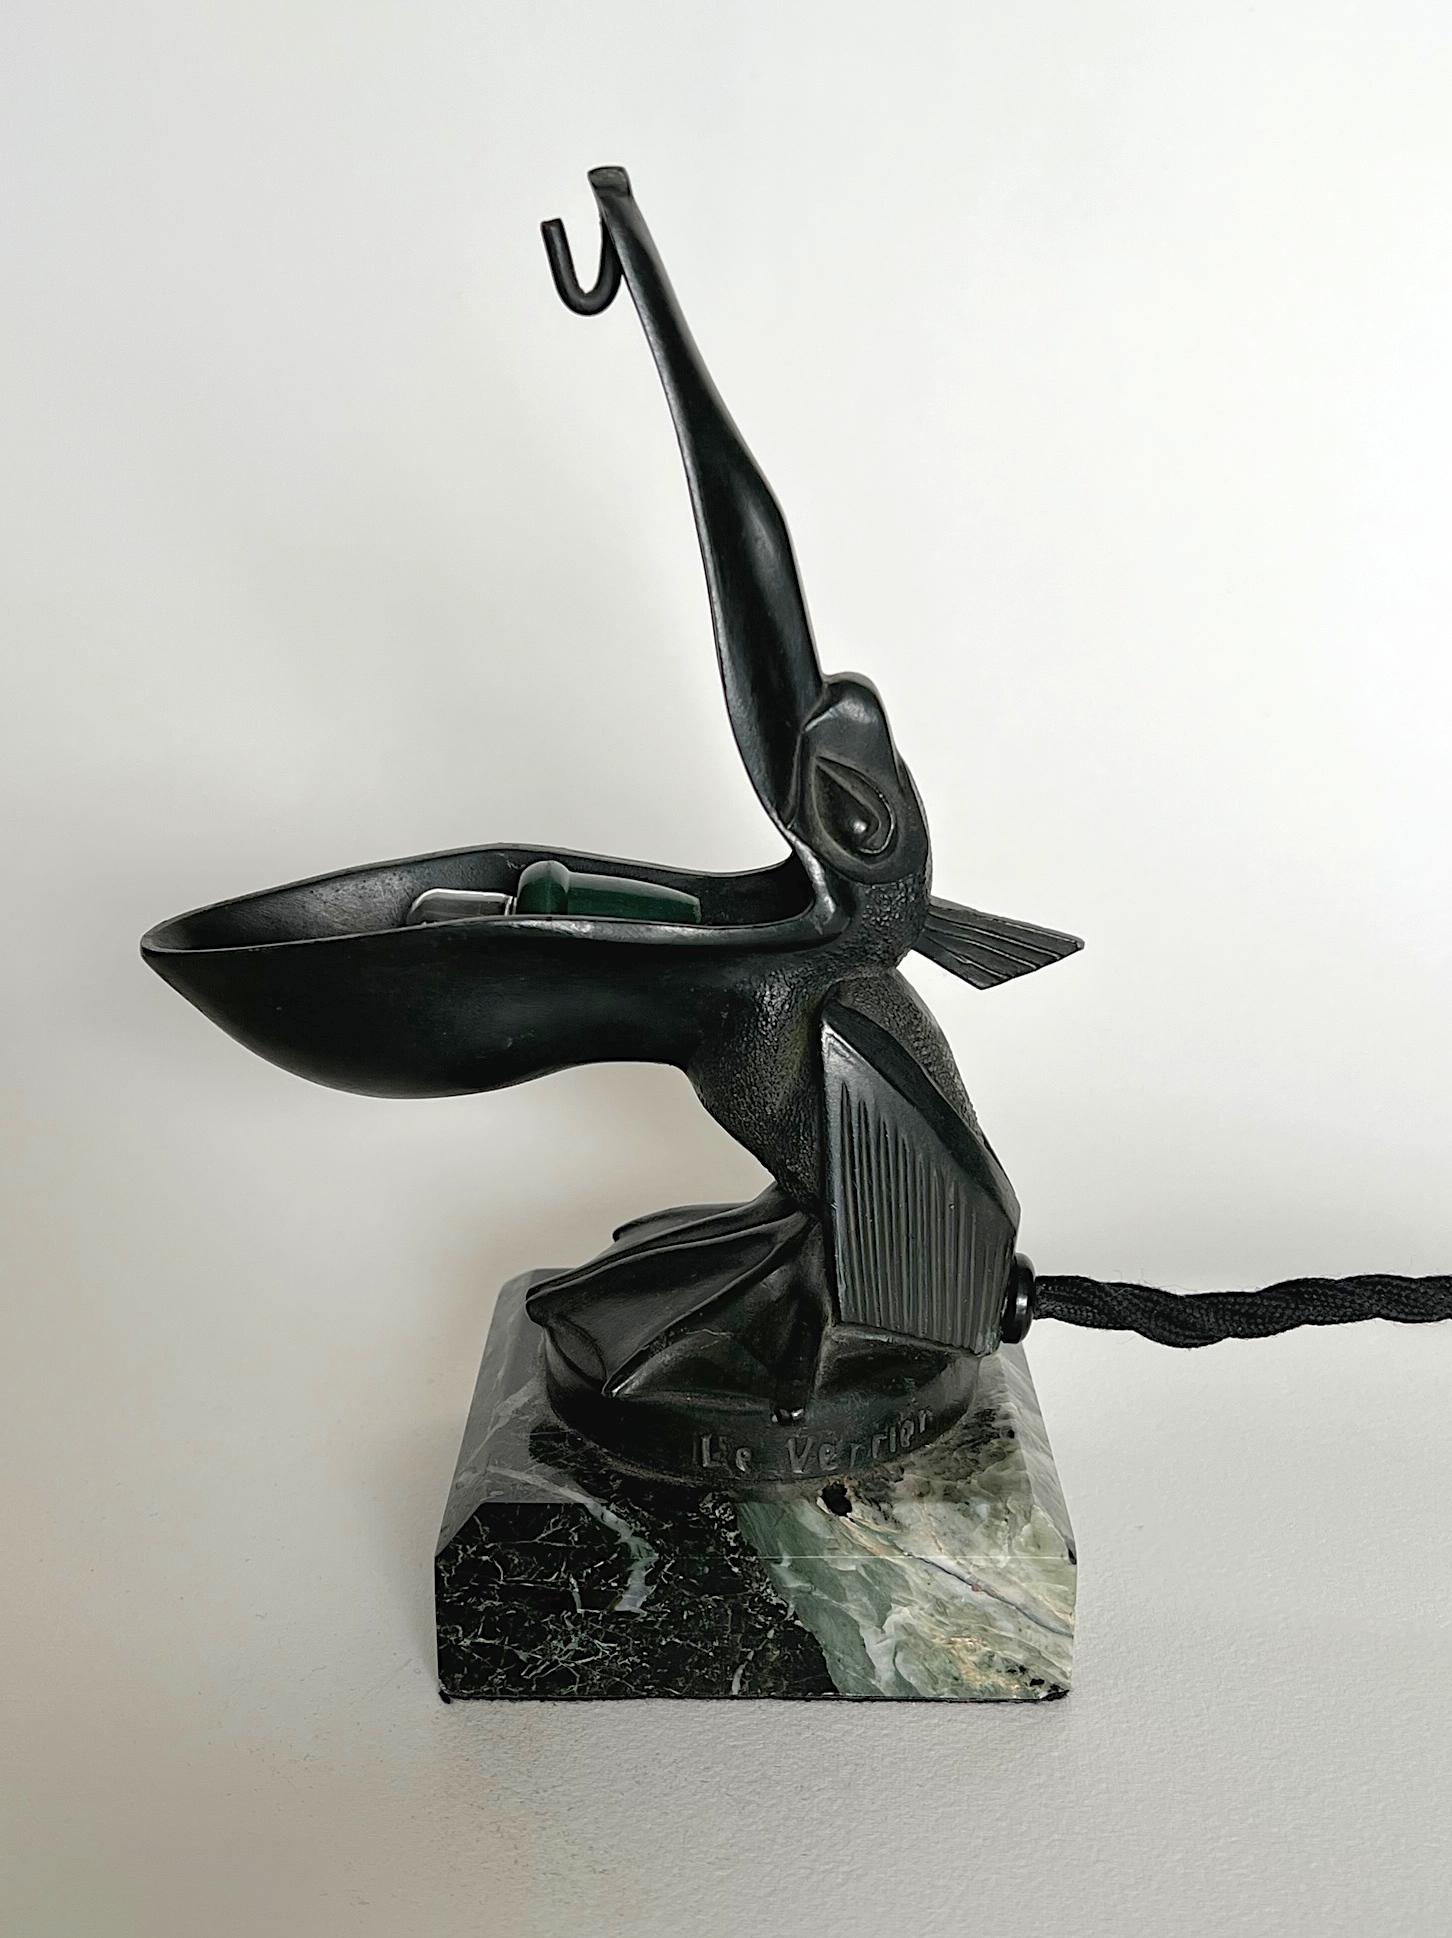 A rare combination of night light & pocket watch holder modelled as a pelican with an open beak. Cast in 'fonte d'art' - a unique alloy developed by the foundry of Max Le Verrier as an alternative to bronze - and decorated in a deep green patina.